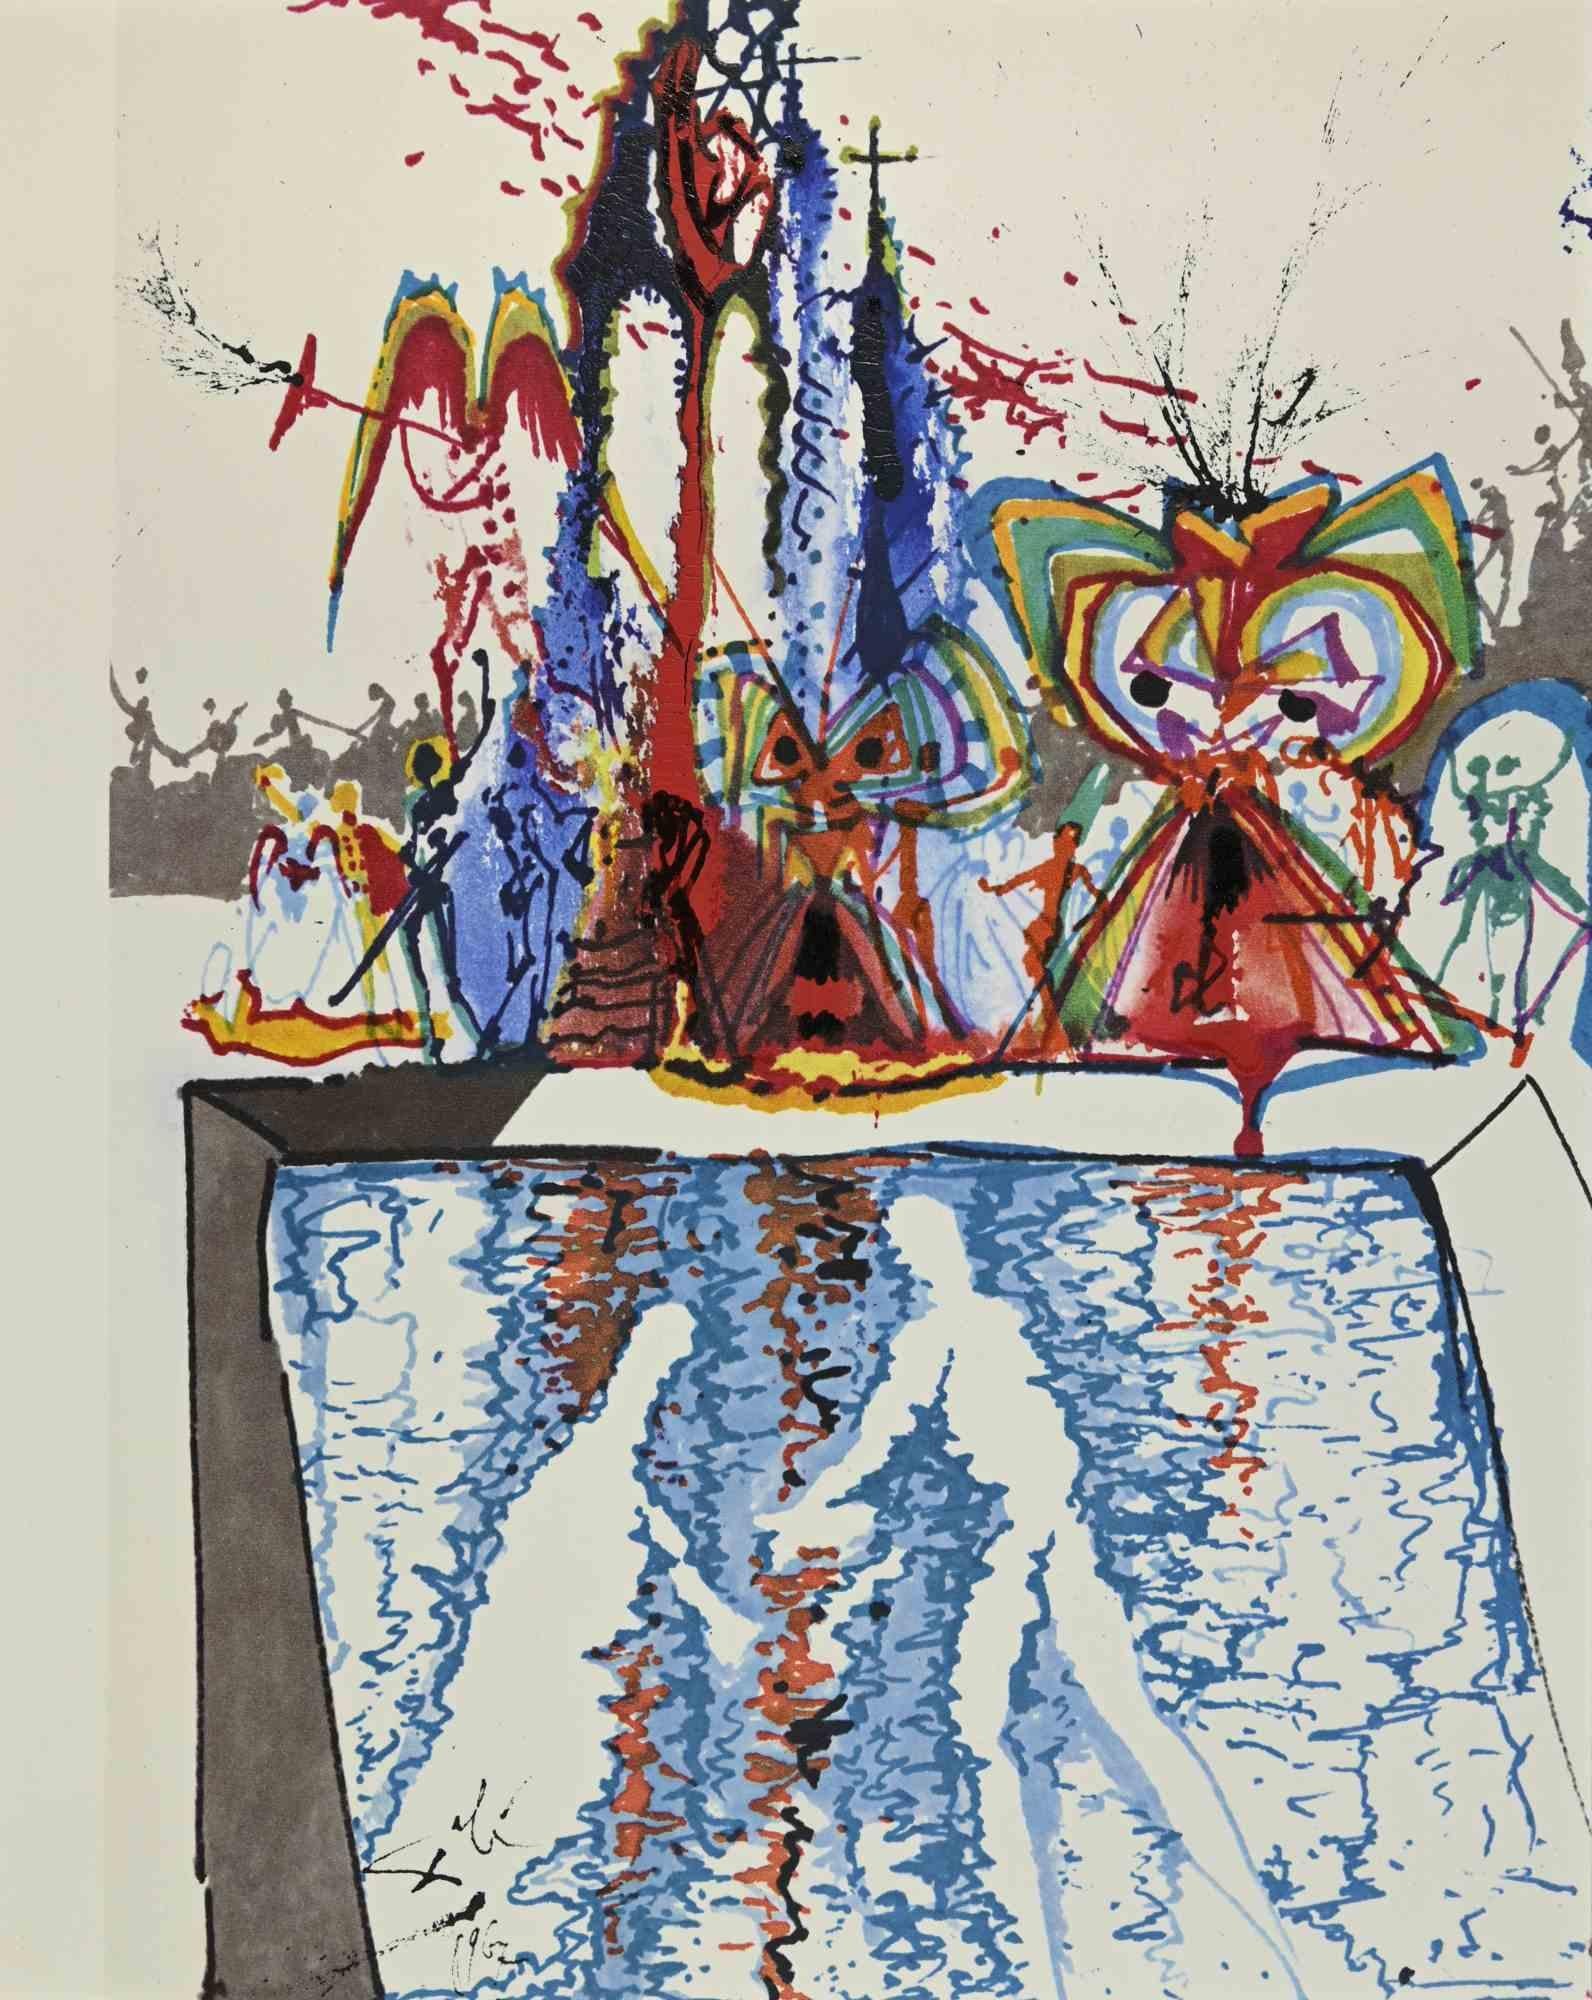 Salvador Dalí Print - Act IV, Scene III - From “Romeo and Juliet”  - Lithograph-1975